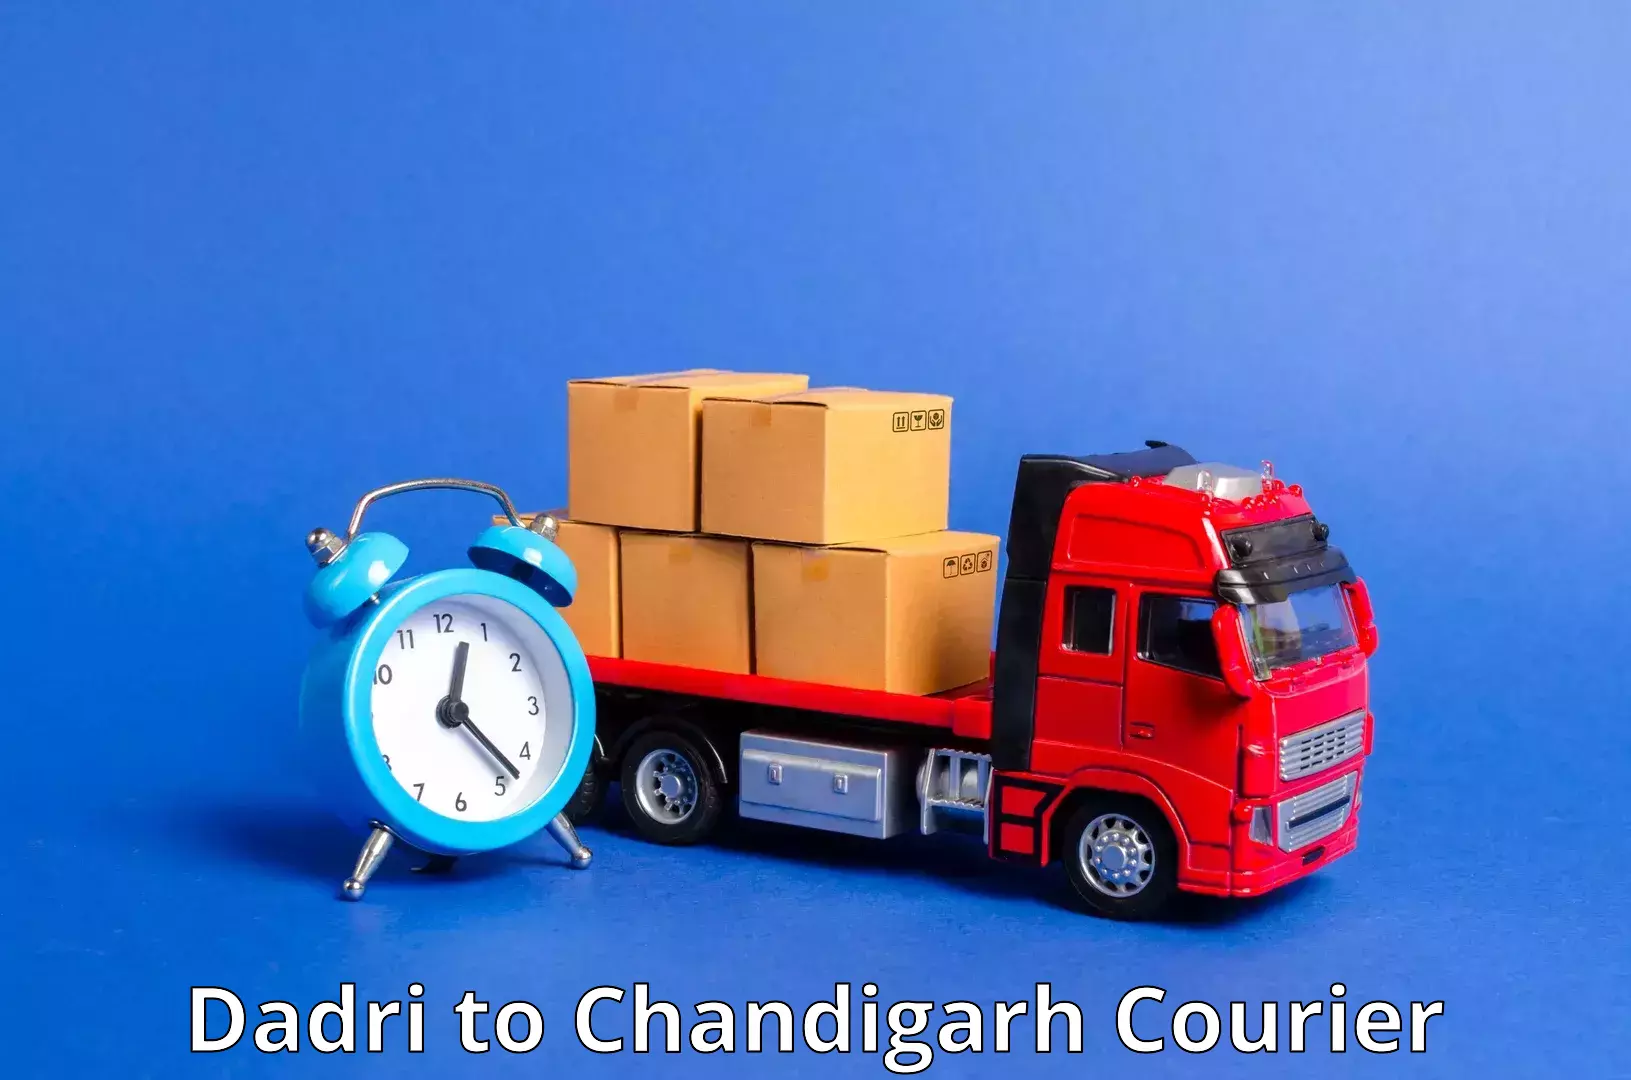 Overnight delivery services Dadri to Chandigarh